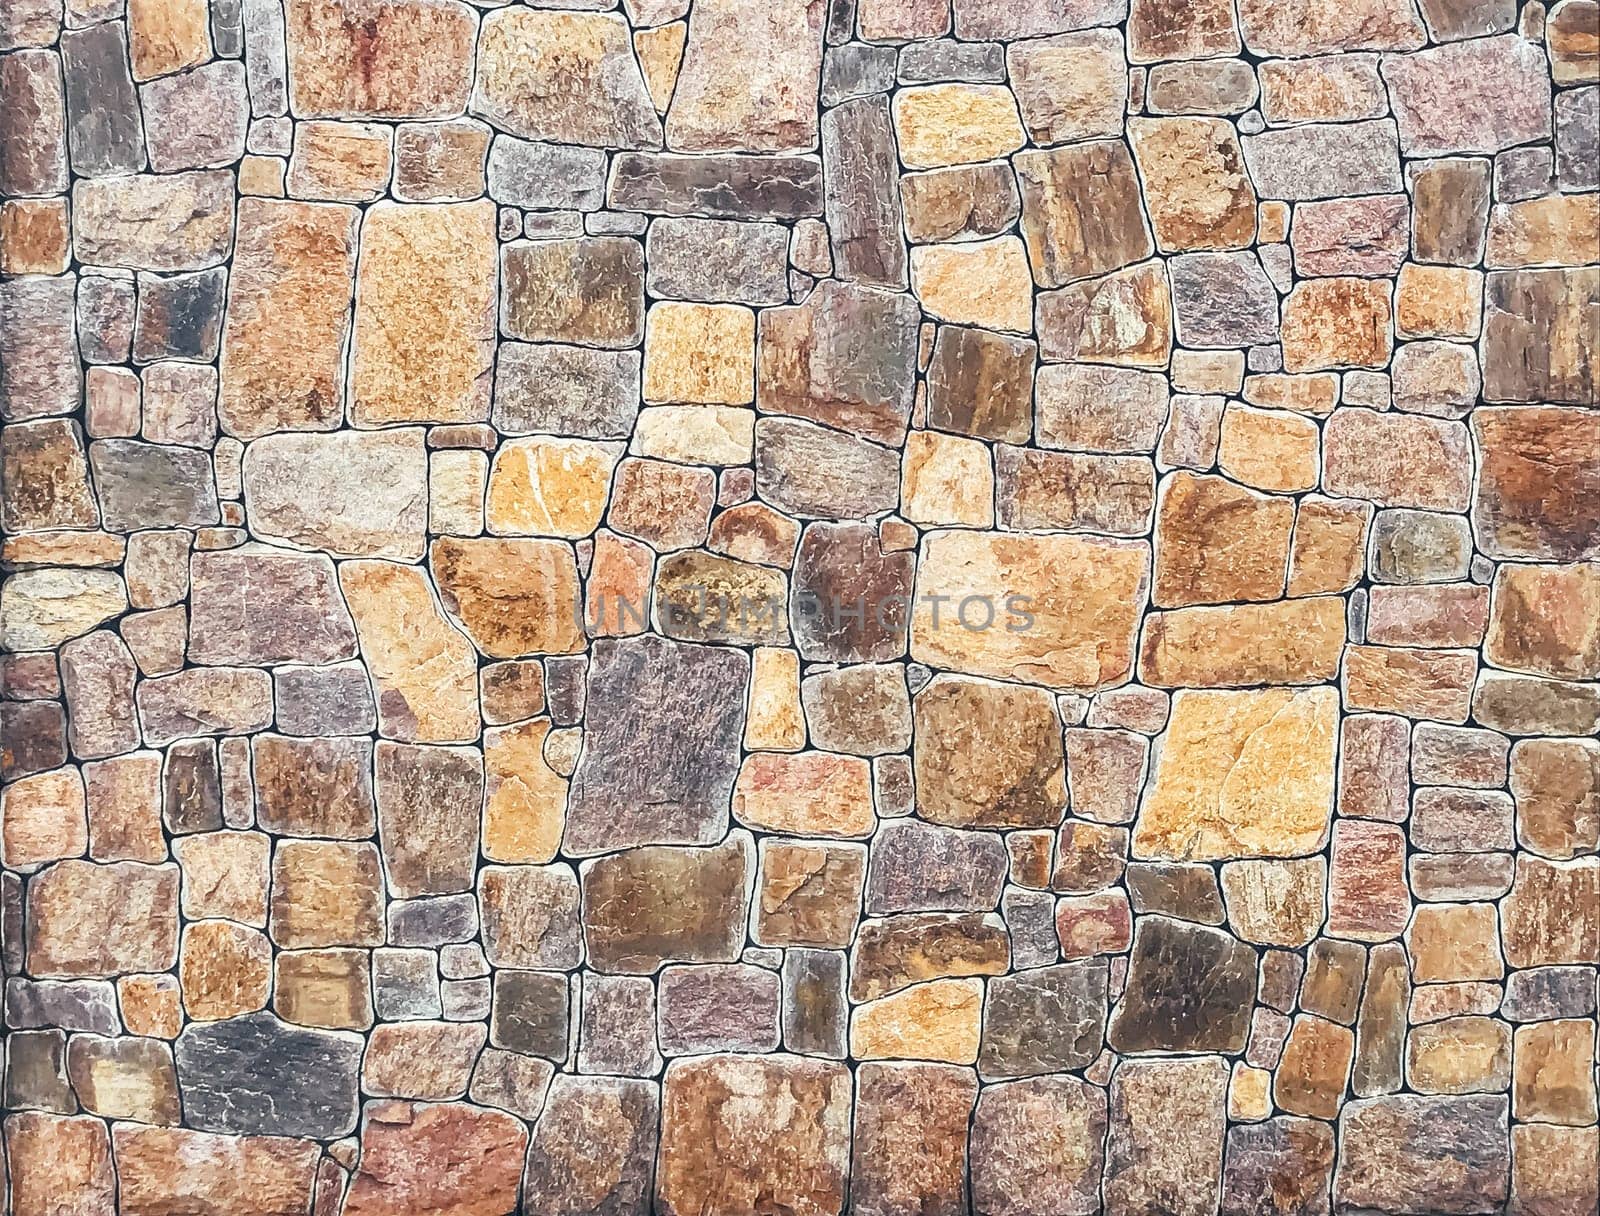 A wall made of stone blocks with a brown and tan color by Alla_Morozova93